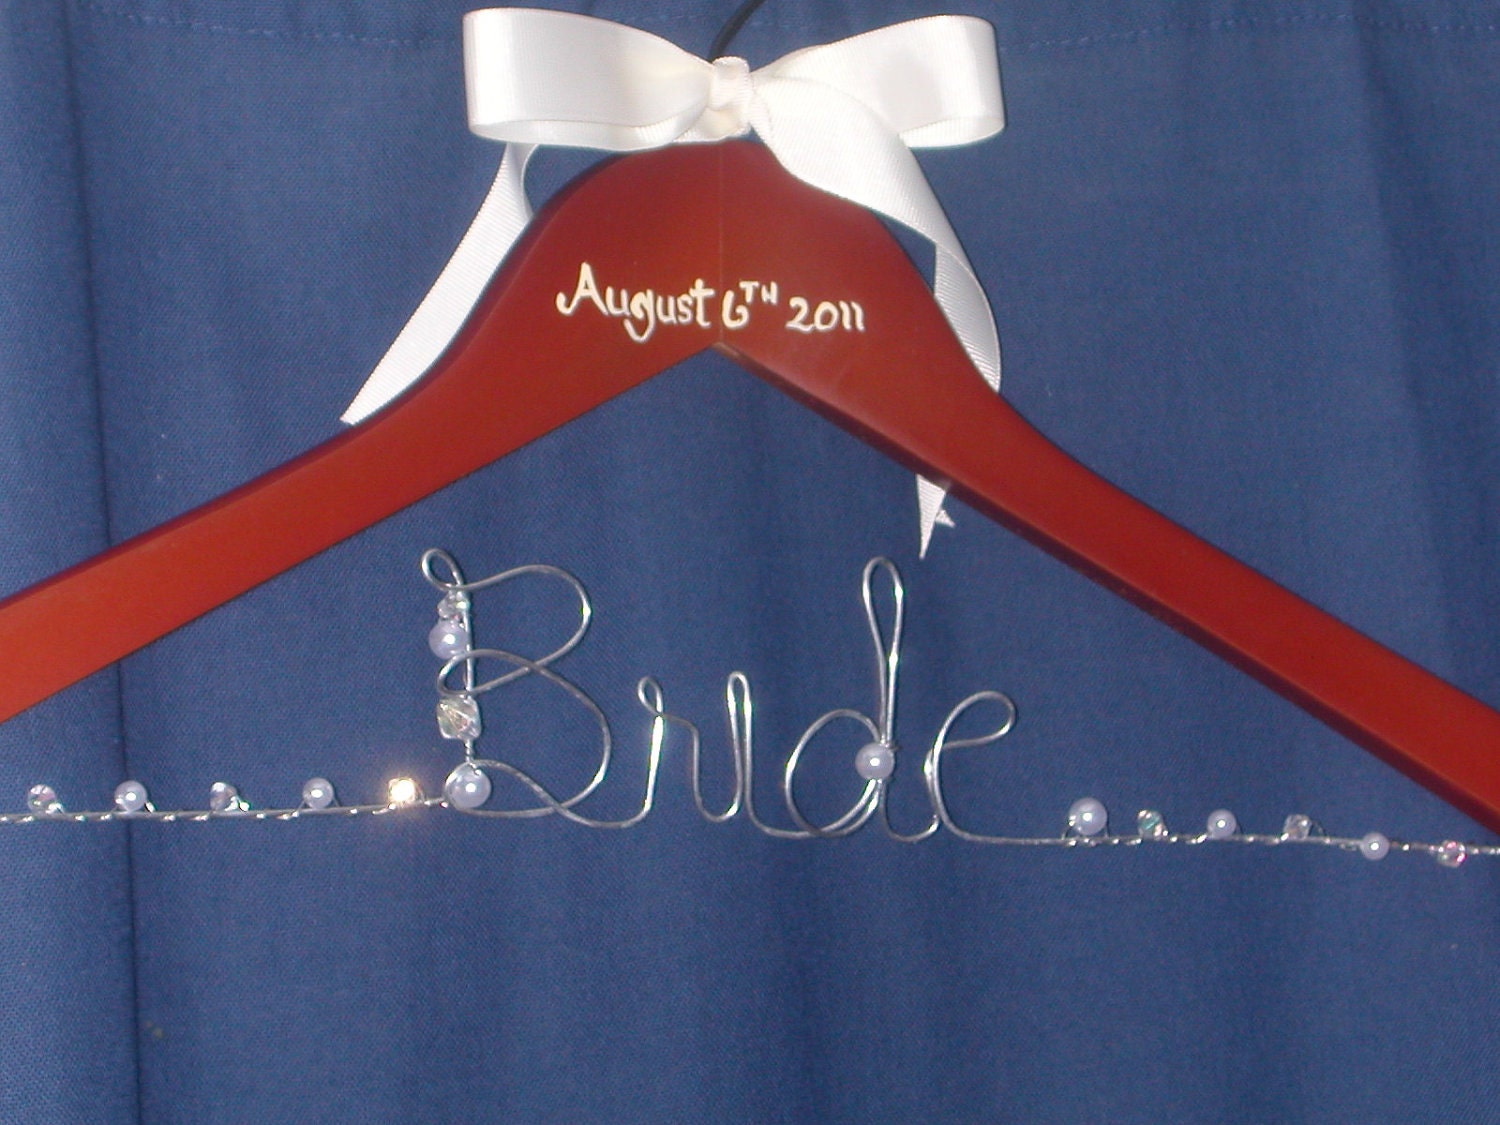 Artsy  Cherry Wood Bridal Wedding Dress Hanger Personalized with BRIDE and Wedding Date....Embellished with Beads